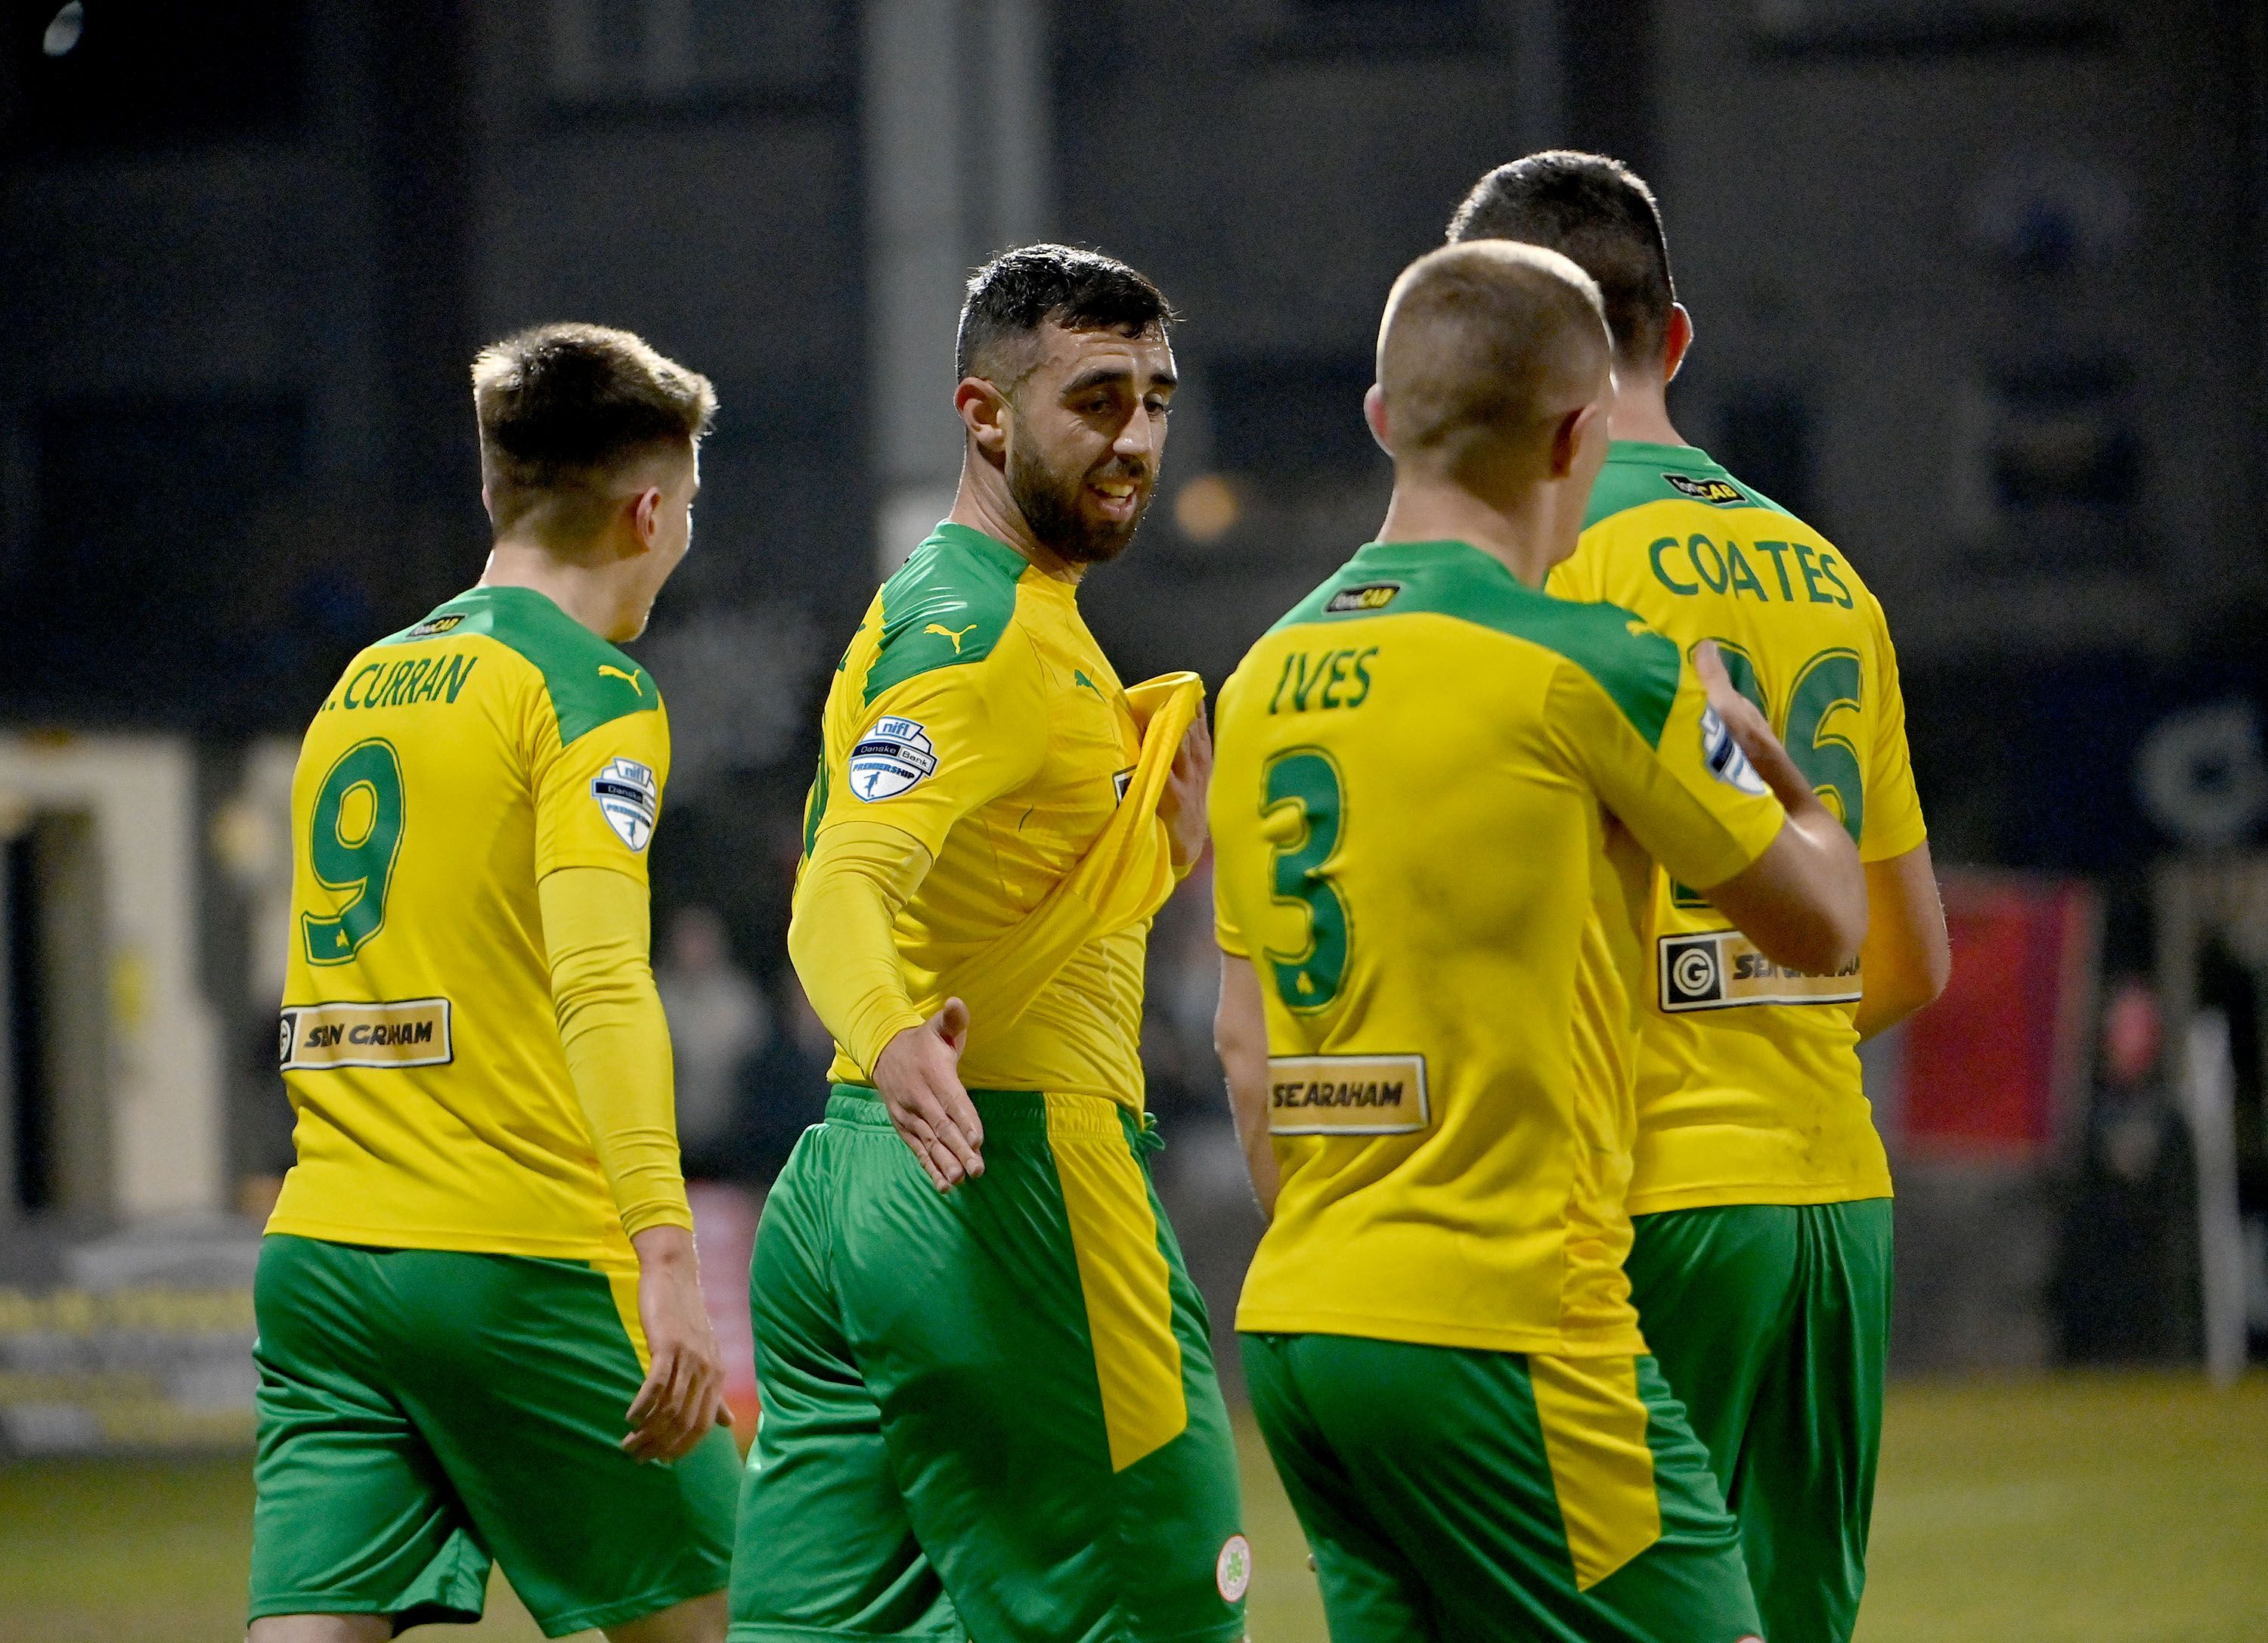 Paddy McLaughlin believes Joe Gormley is hitting top form at just the right time of the season